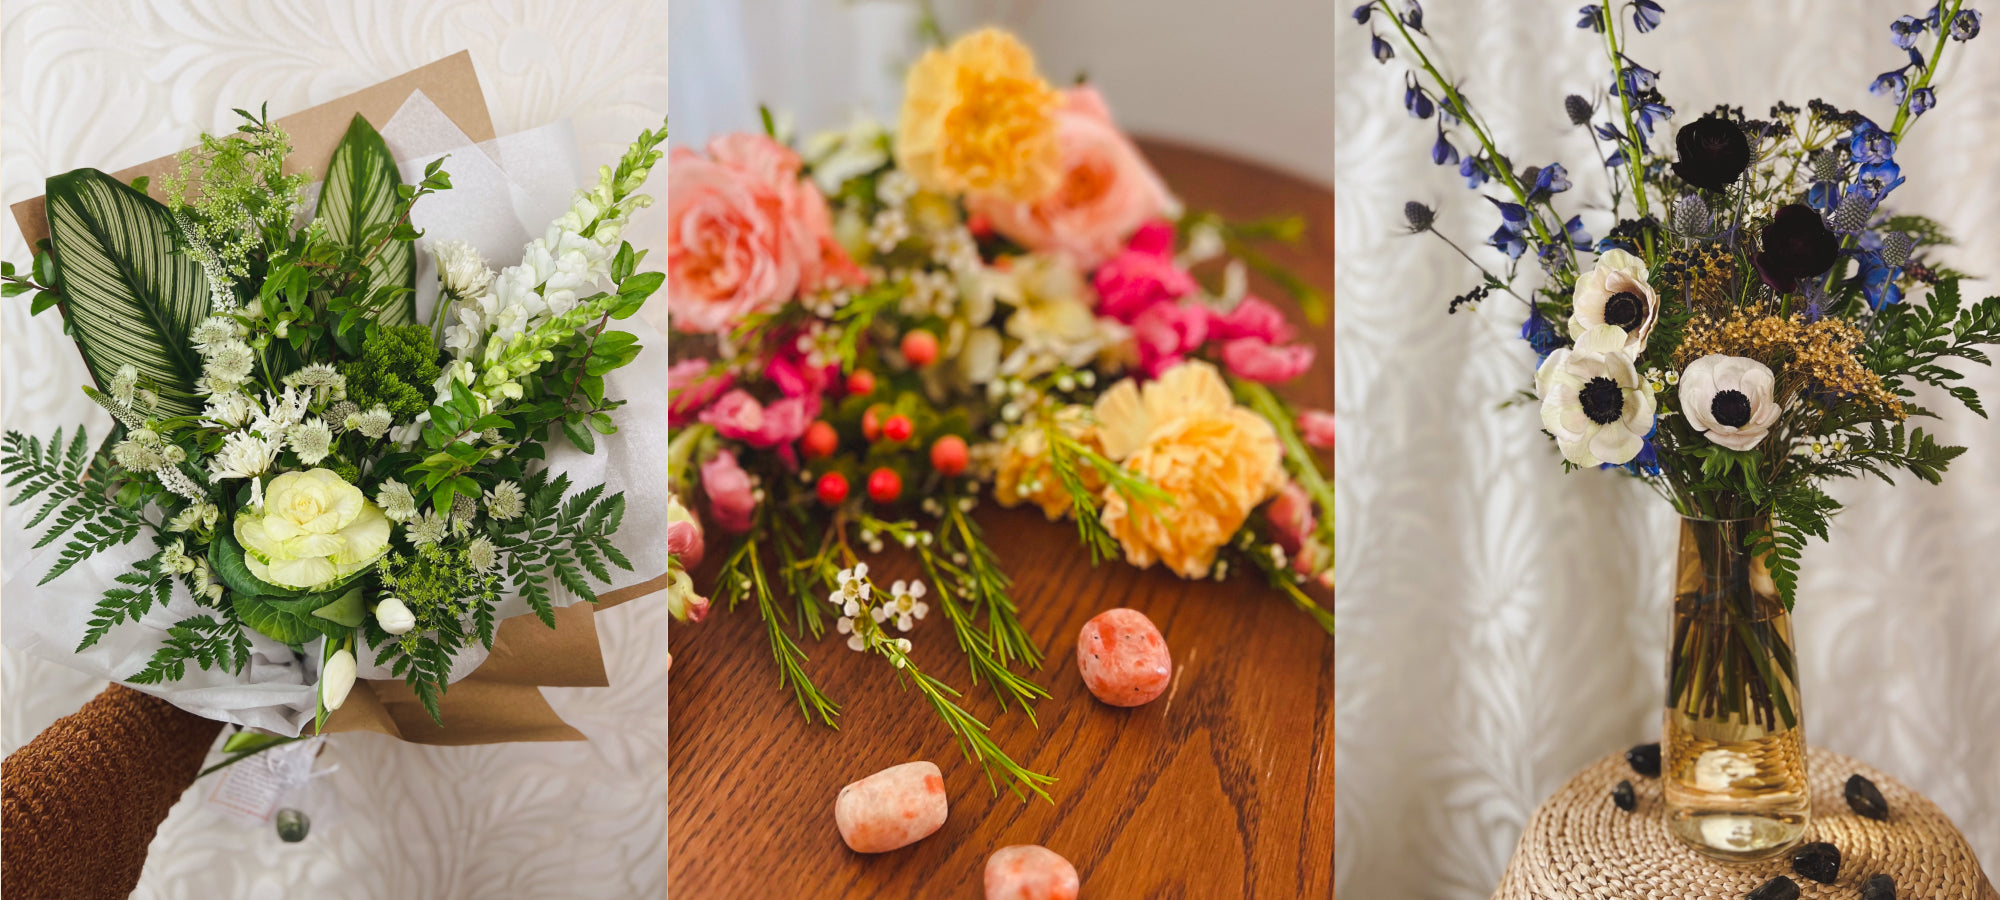 Three images, each showing a different colored fresh flower bouquet paired with a matching crystal